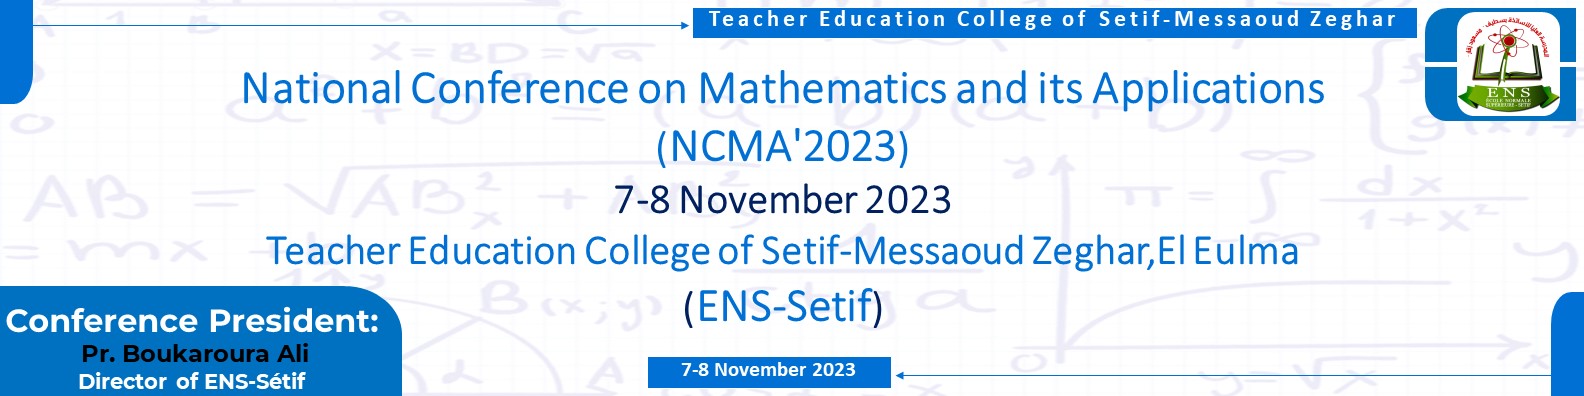 National Conference on Mathematics and its Applications